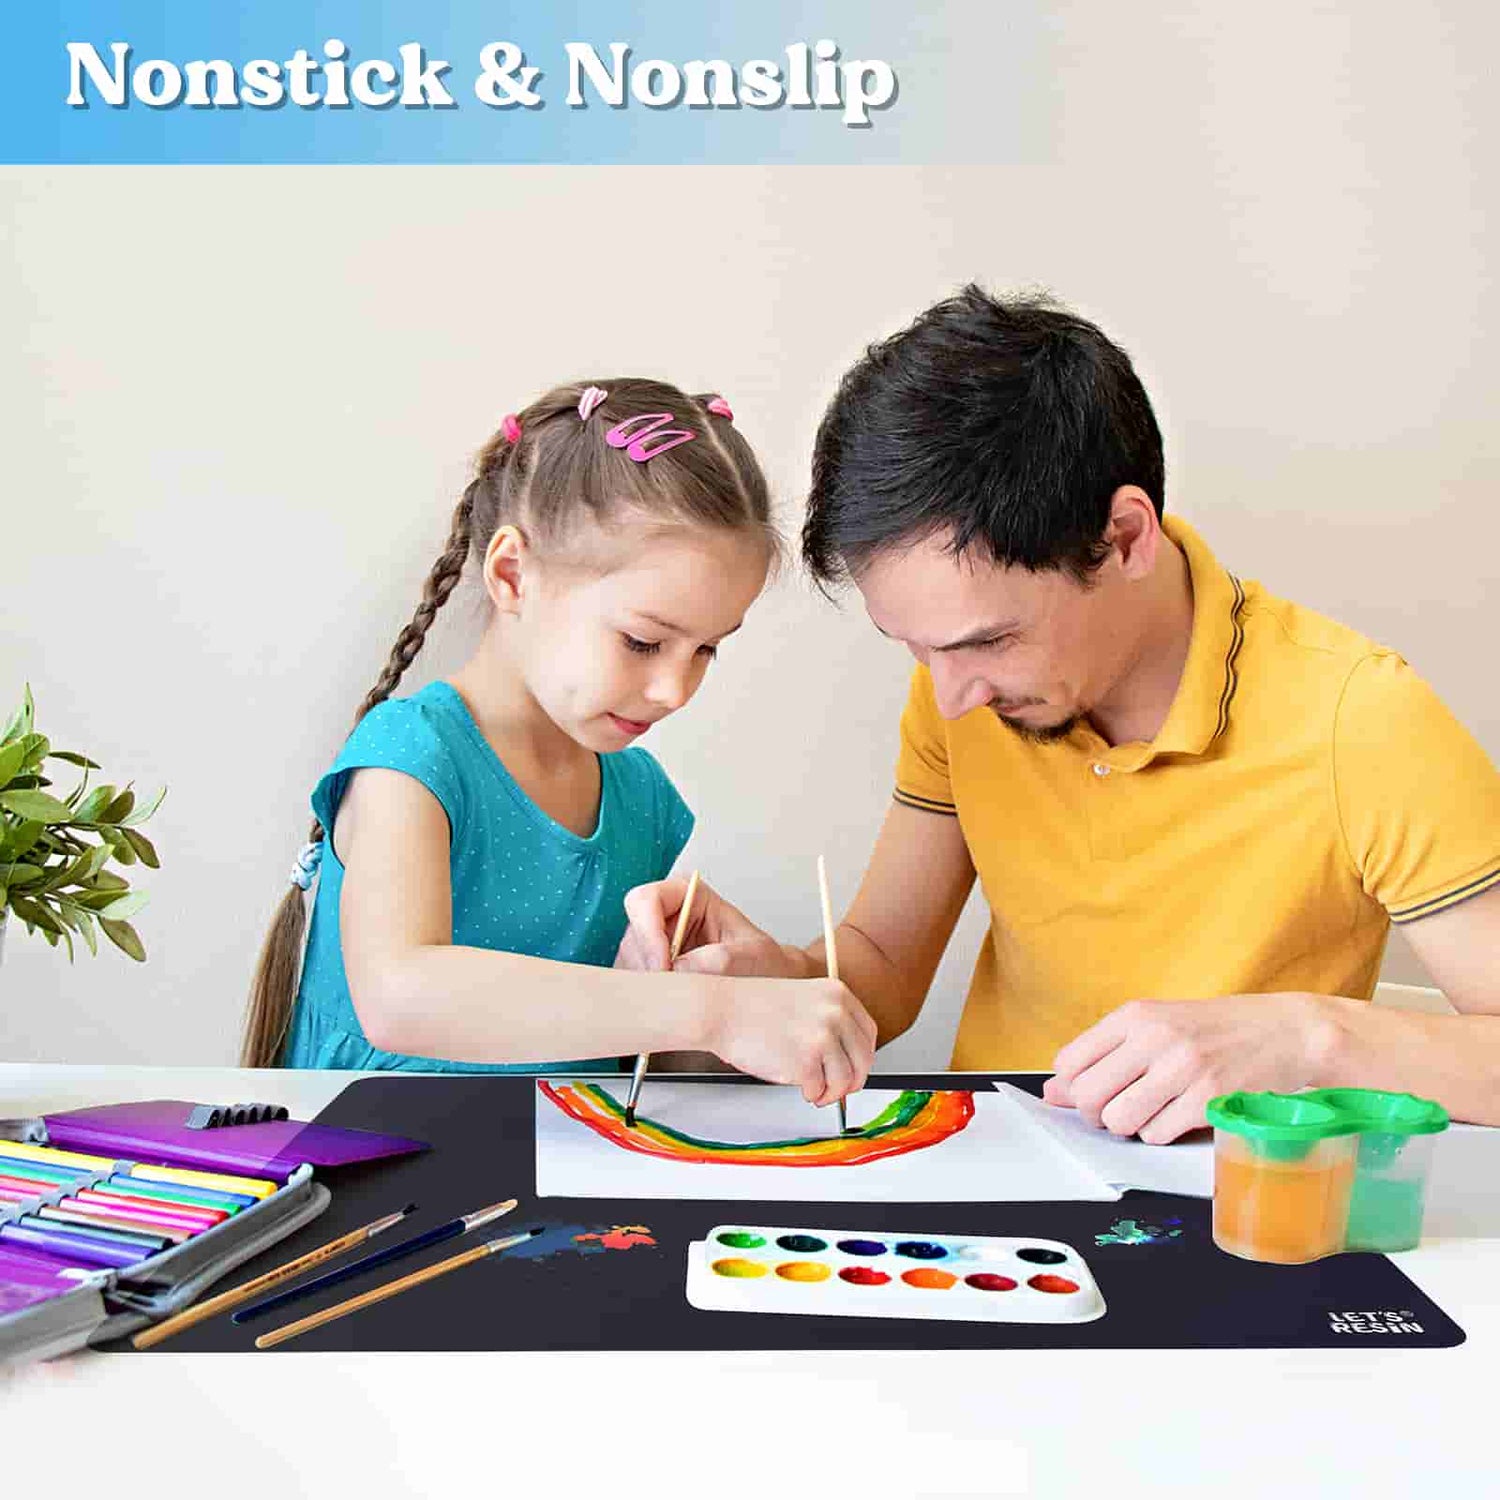 Large Silicone Mat For Crafts Nonslip Nonstick Sheet For Jewelry